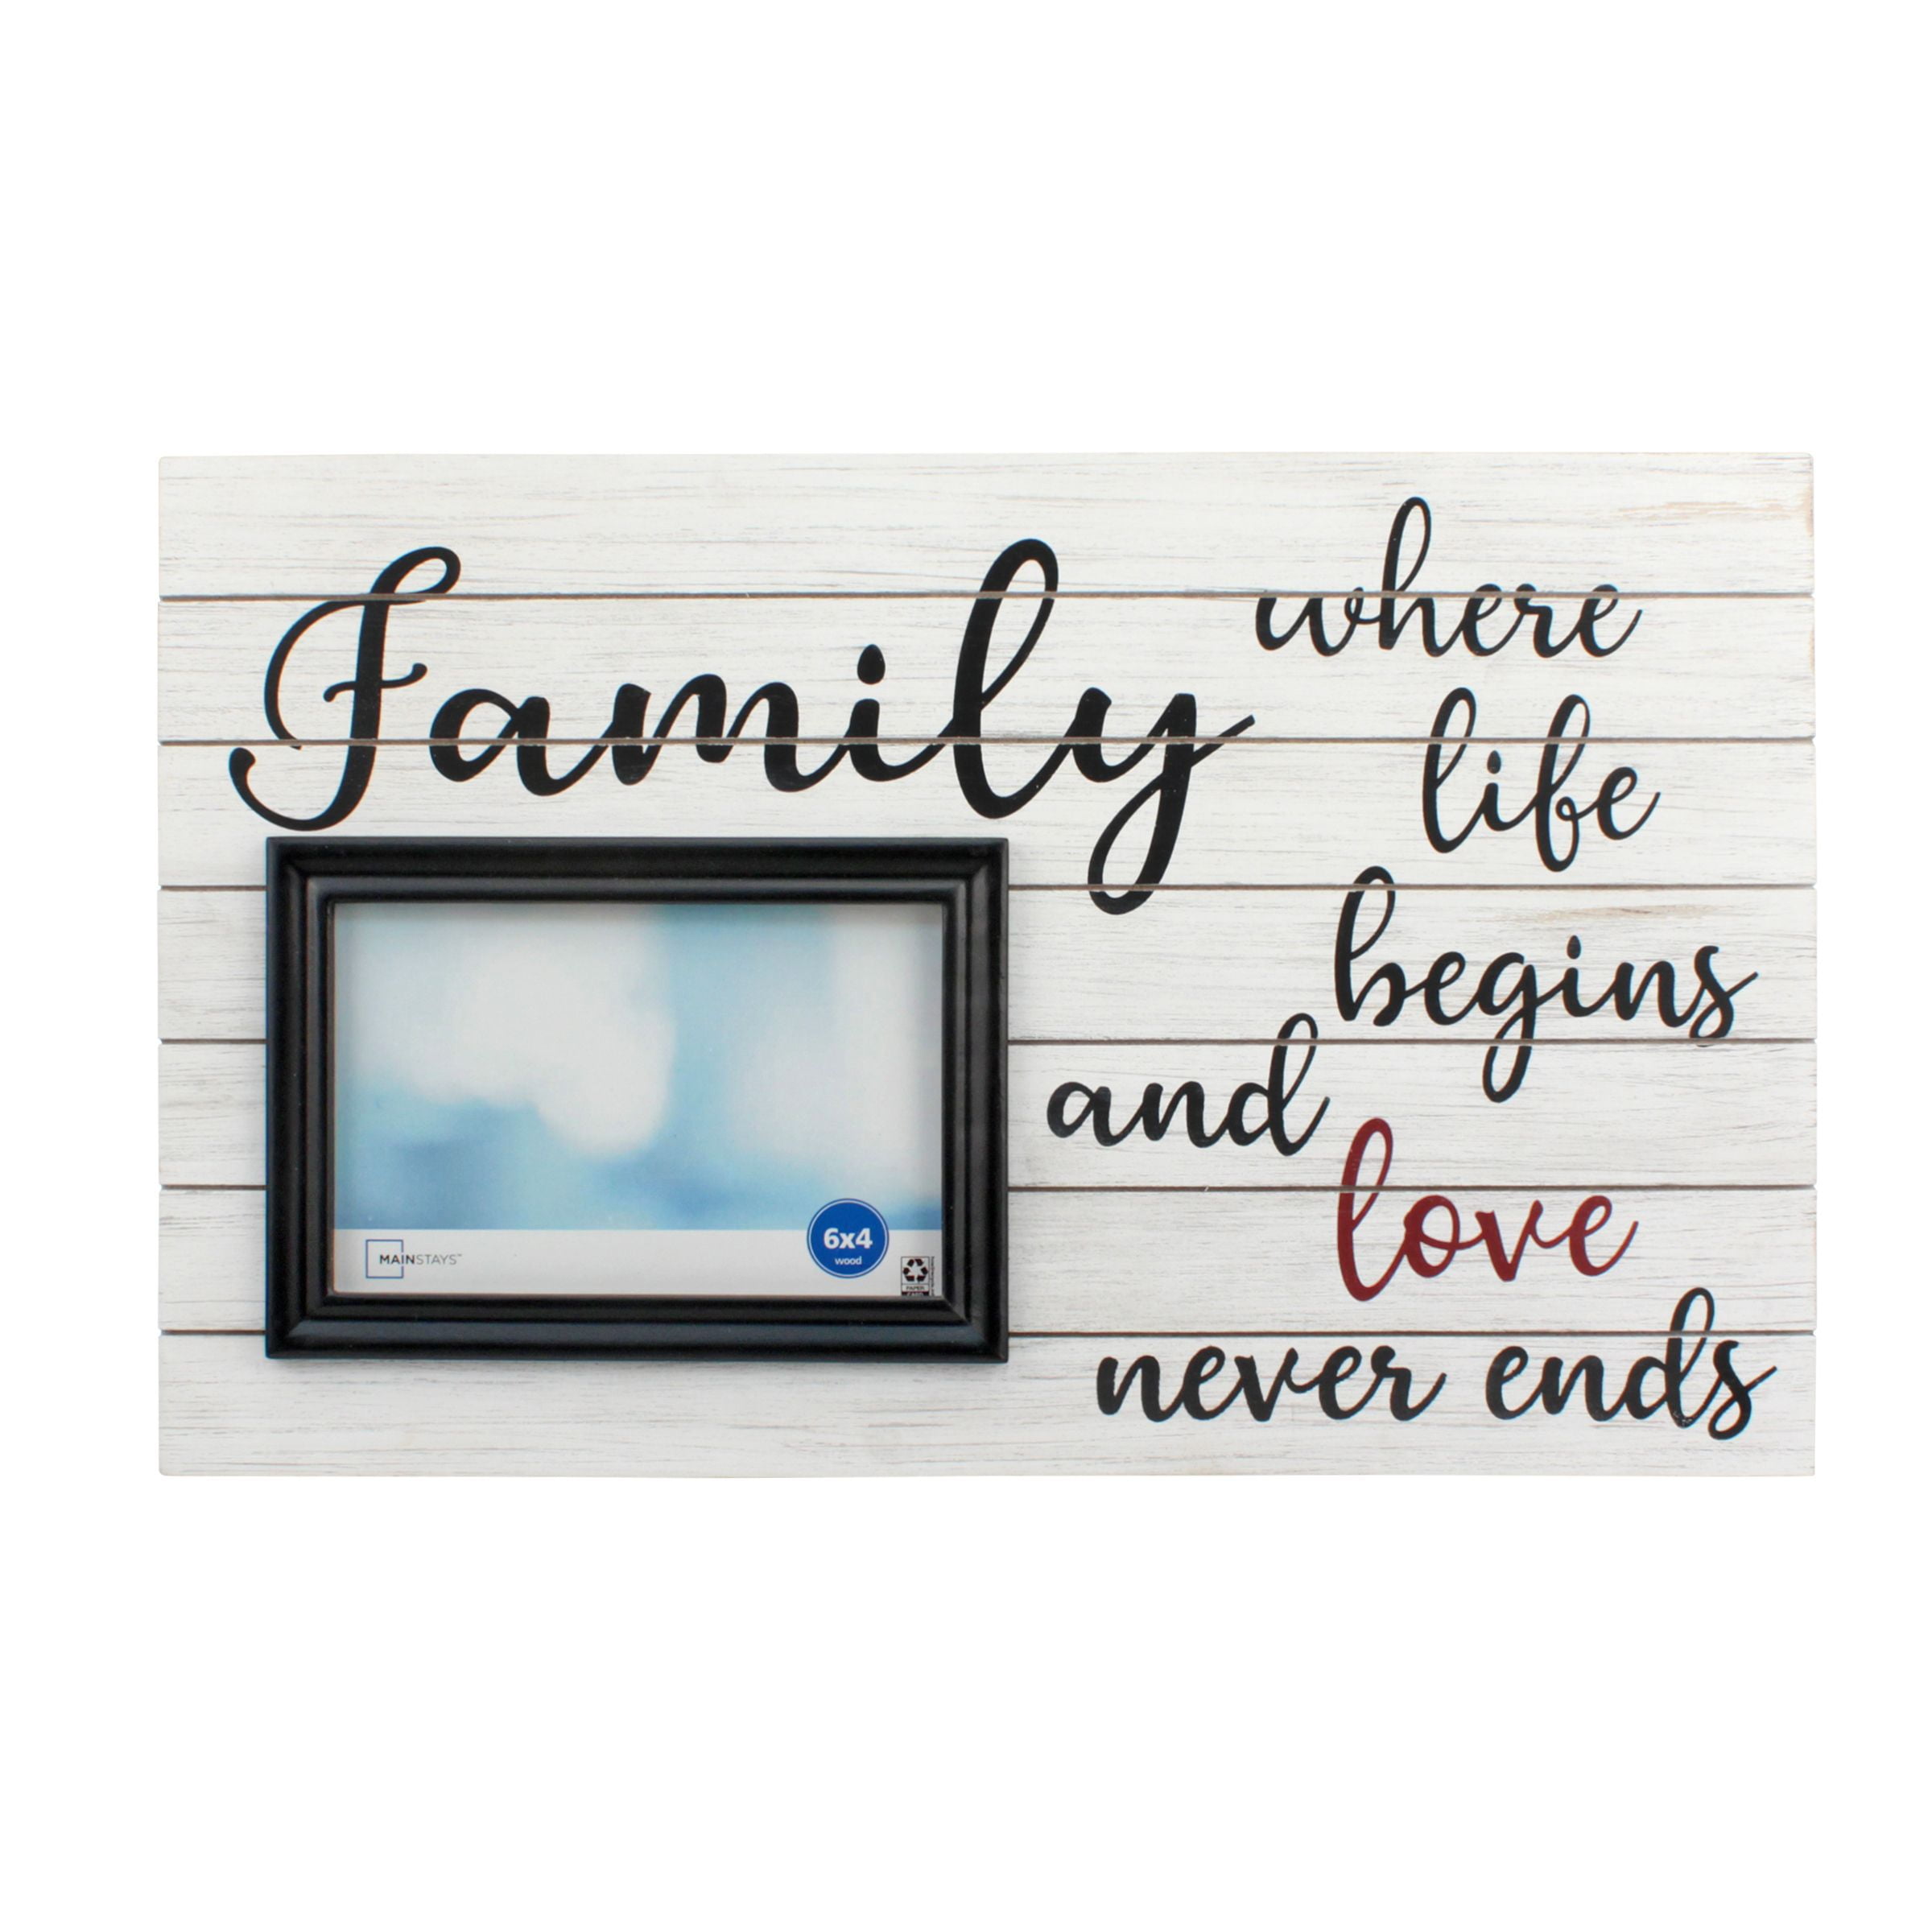 Details about   Table Fram Photo Display Home Decor Picture Frame 6x4in Photo for Family Friends 